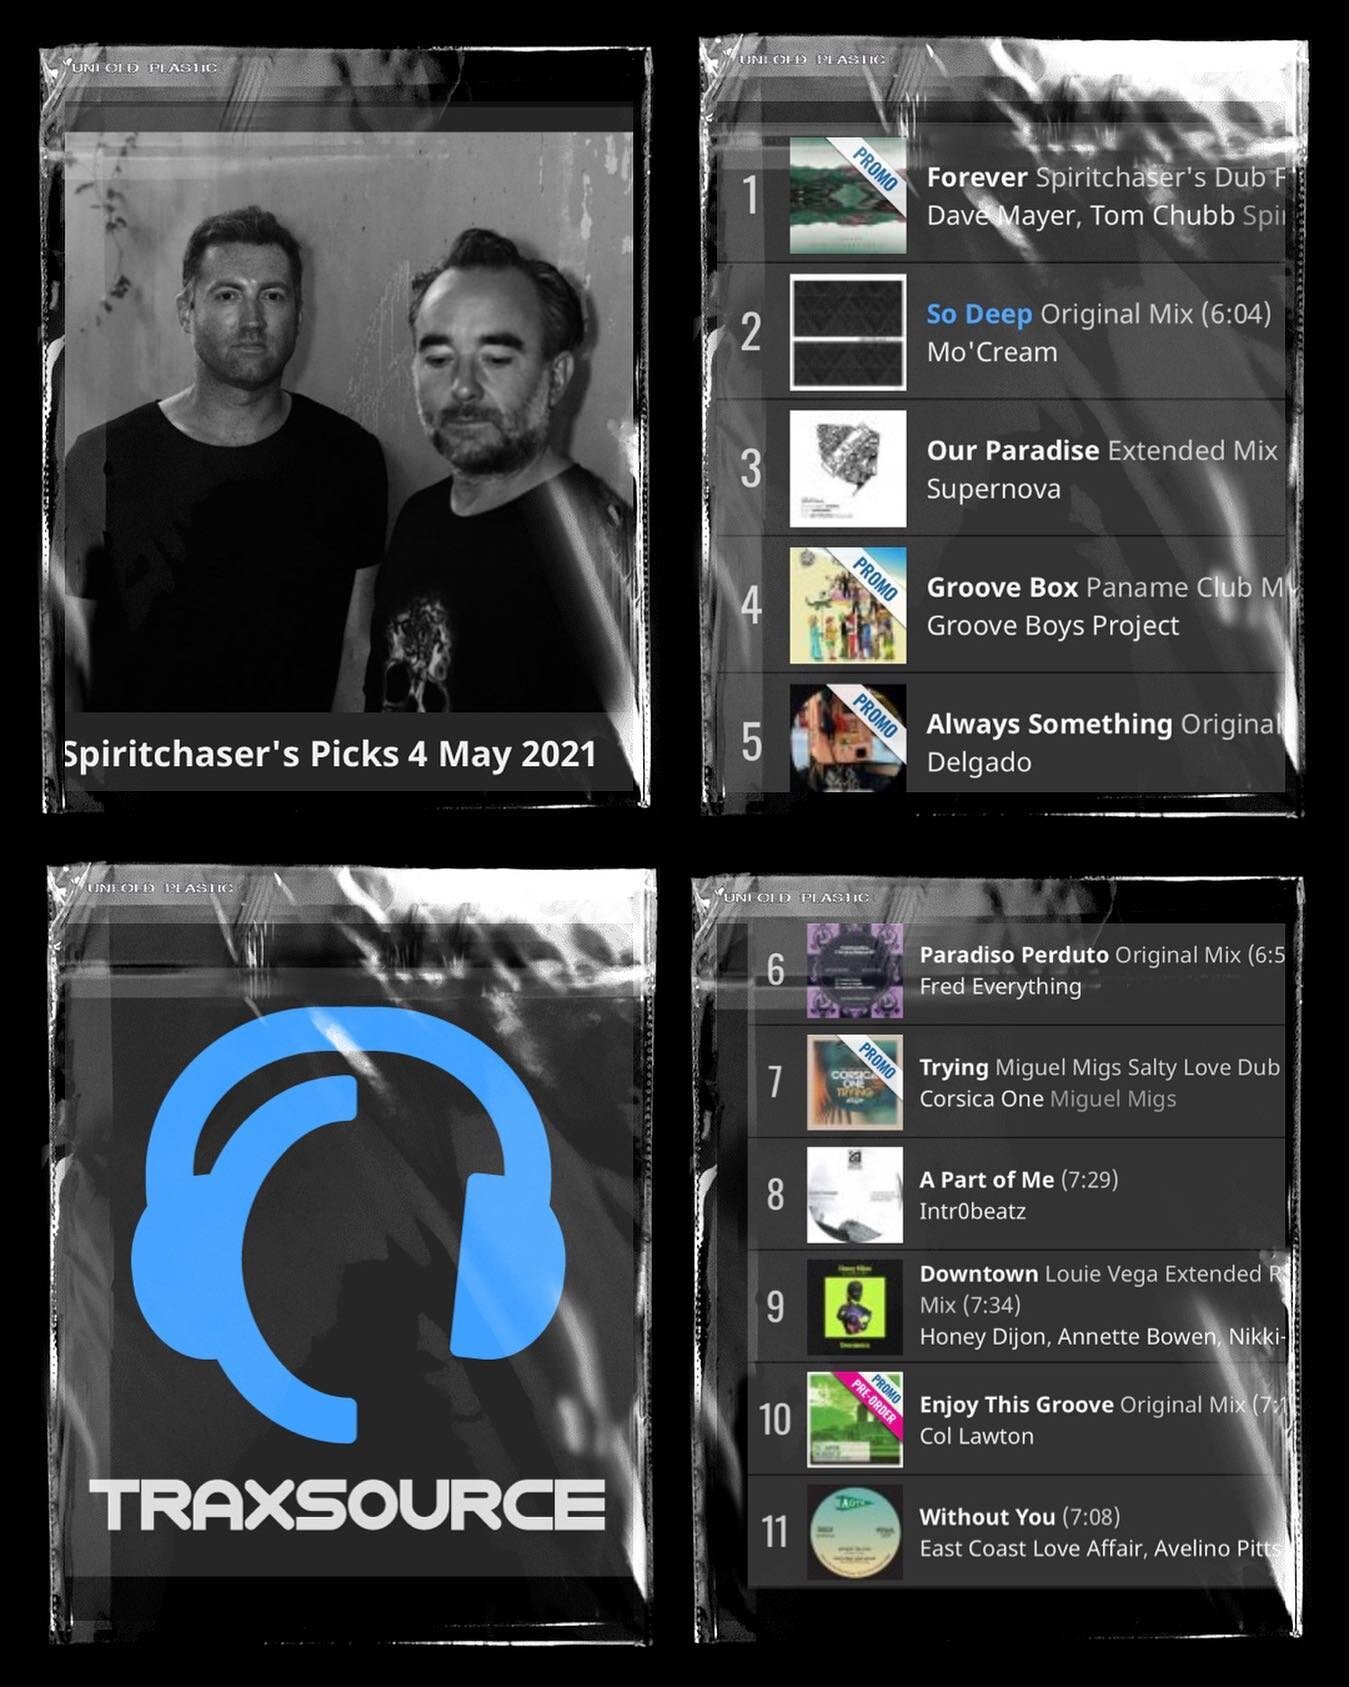 Fresh noises in our May chart for @traxsource featuring music from @mo_cream_ @honeydijon @louievega @supernovaitaly @miguelmigsmusic @fredeverything our latest &ldquo;Dub For Love&rdquo; and more&hellip;

Hit the link in our bio and click through to